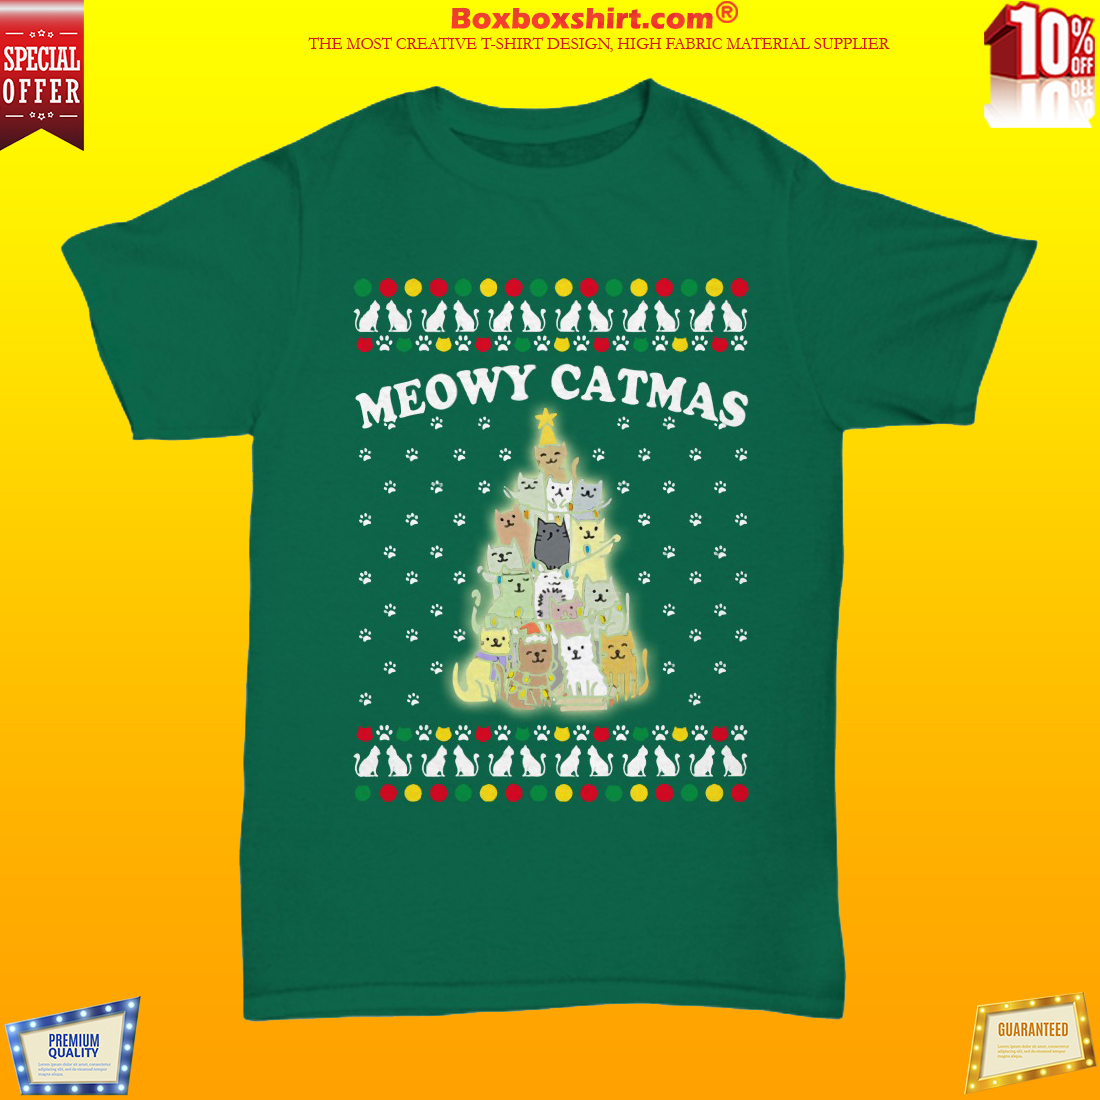 Meowy Catmas ugly Christmas sweater and hoodies